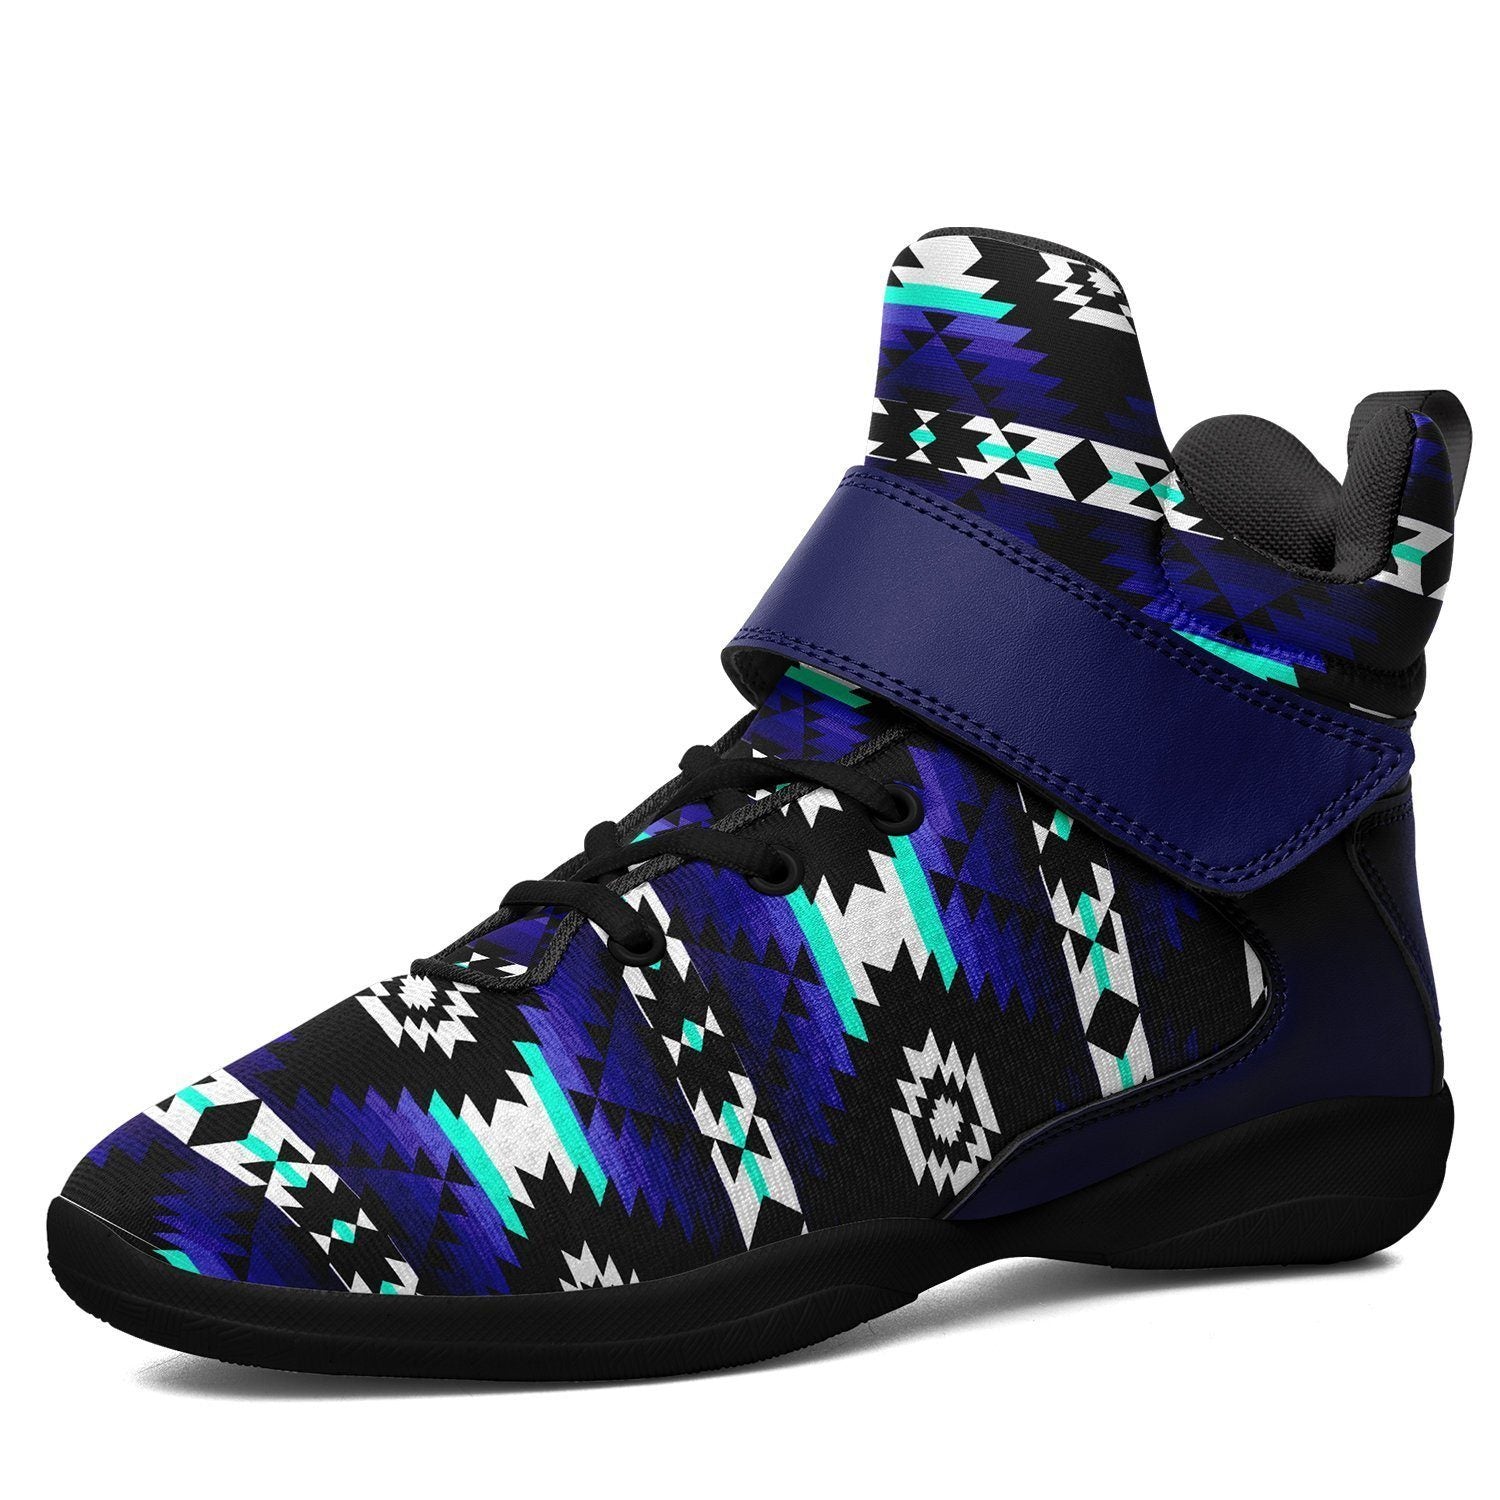 Cree Confederacy Midnight Kid's Ipottaa Basketball / Sport High Top Shoes 49 Dzine US Women 4.5 / US Youth 3.5 / EUR 35 Black Sole with Blue Strap 